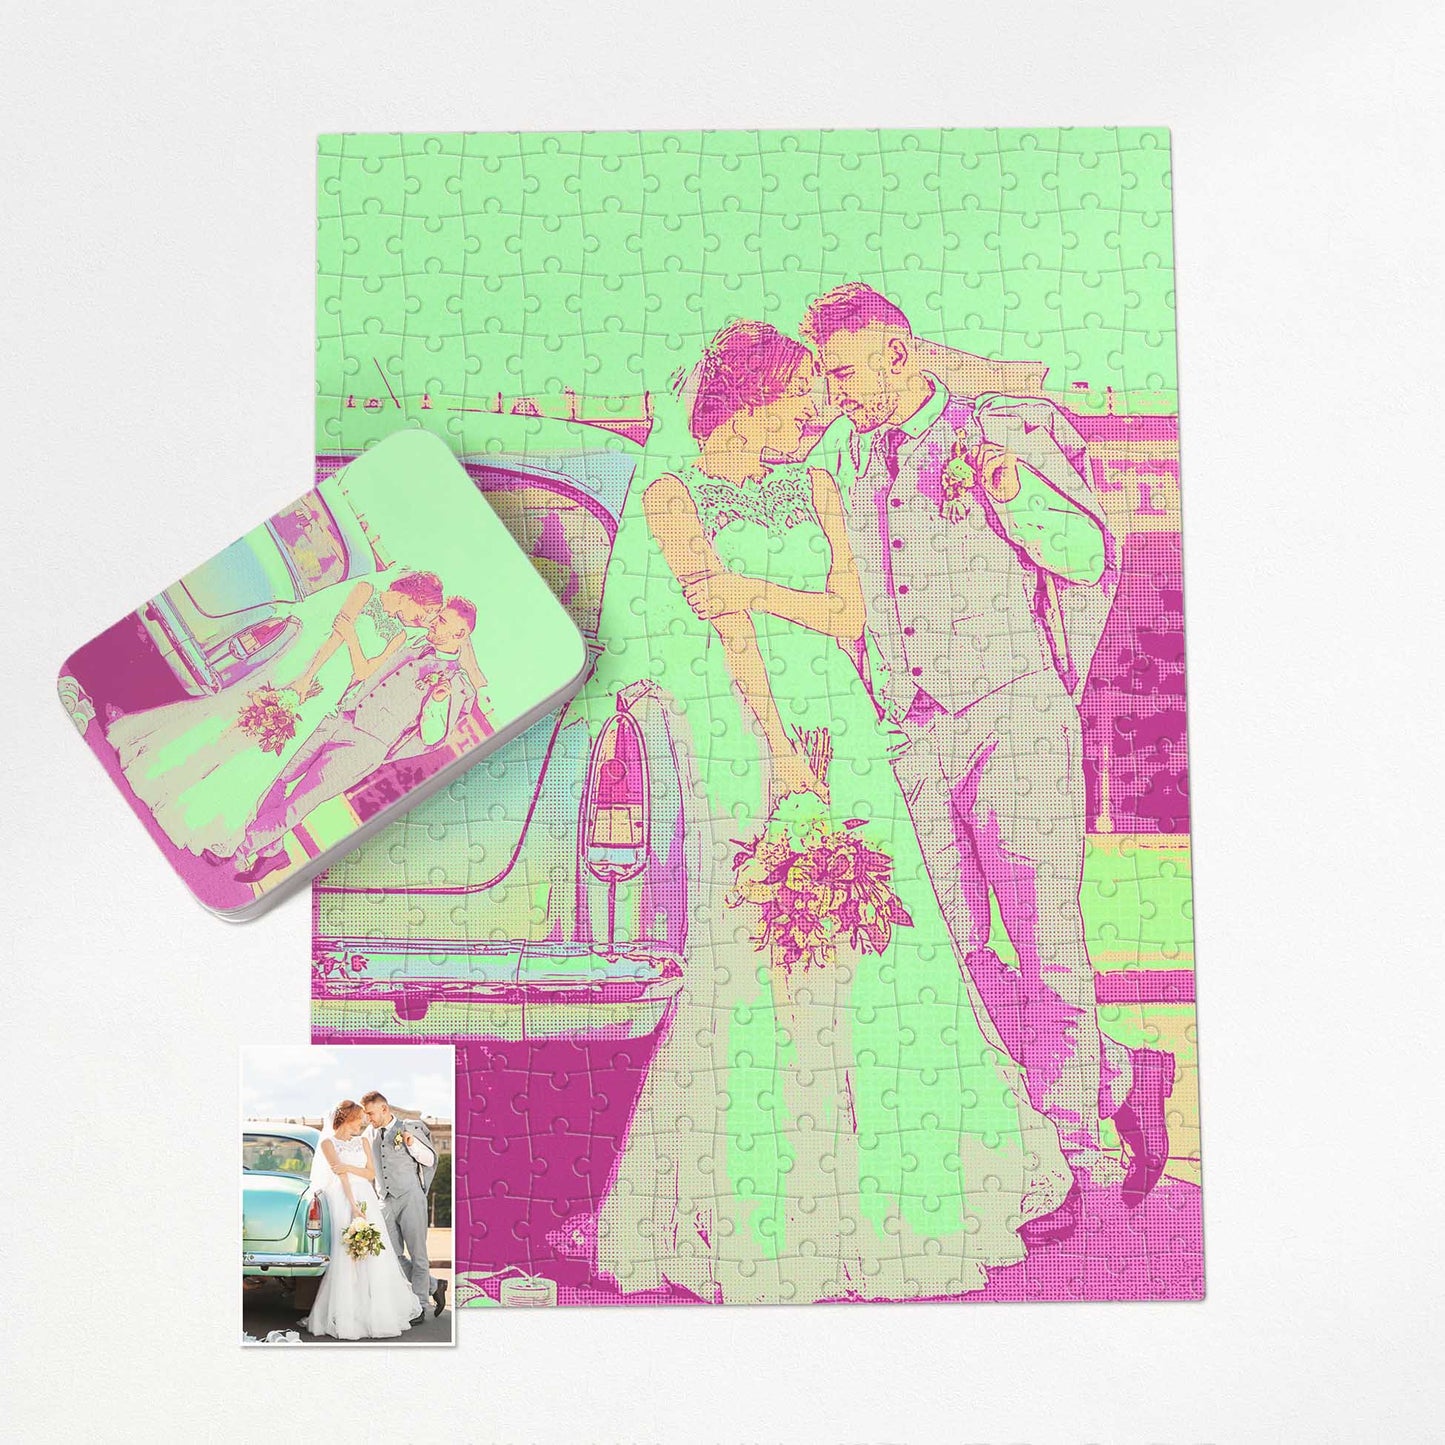 Celebrate with a Personalised Green & Pink Pop Art Jigsaw Puzzle. Cartoon from photo with pop art flair. Handmade and dye sublimation print bring vibrant green and pink colors. A unique, creative, and bright gift idea for friends and family